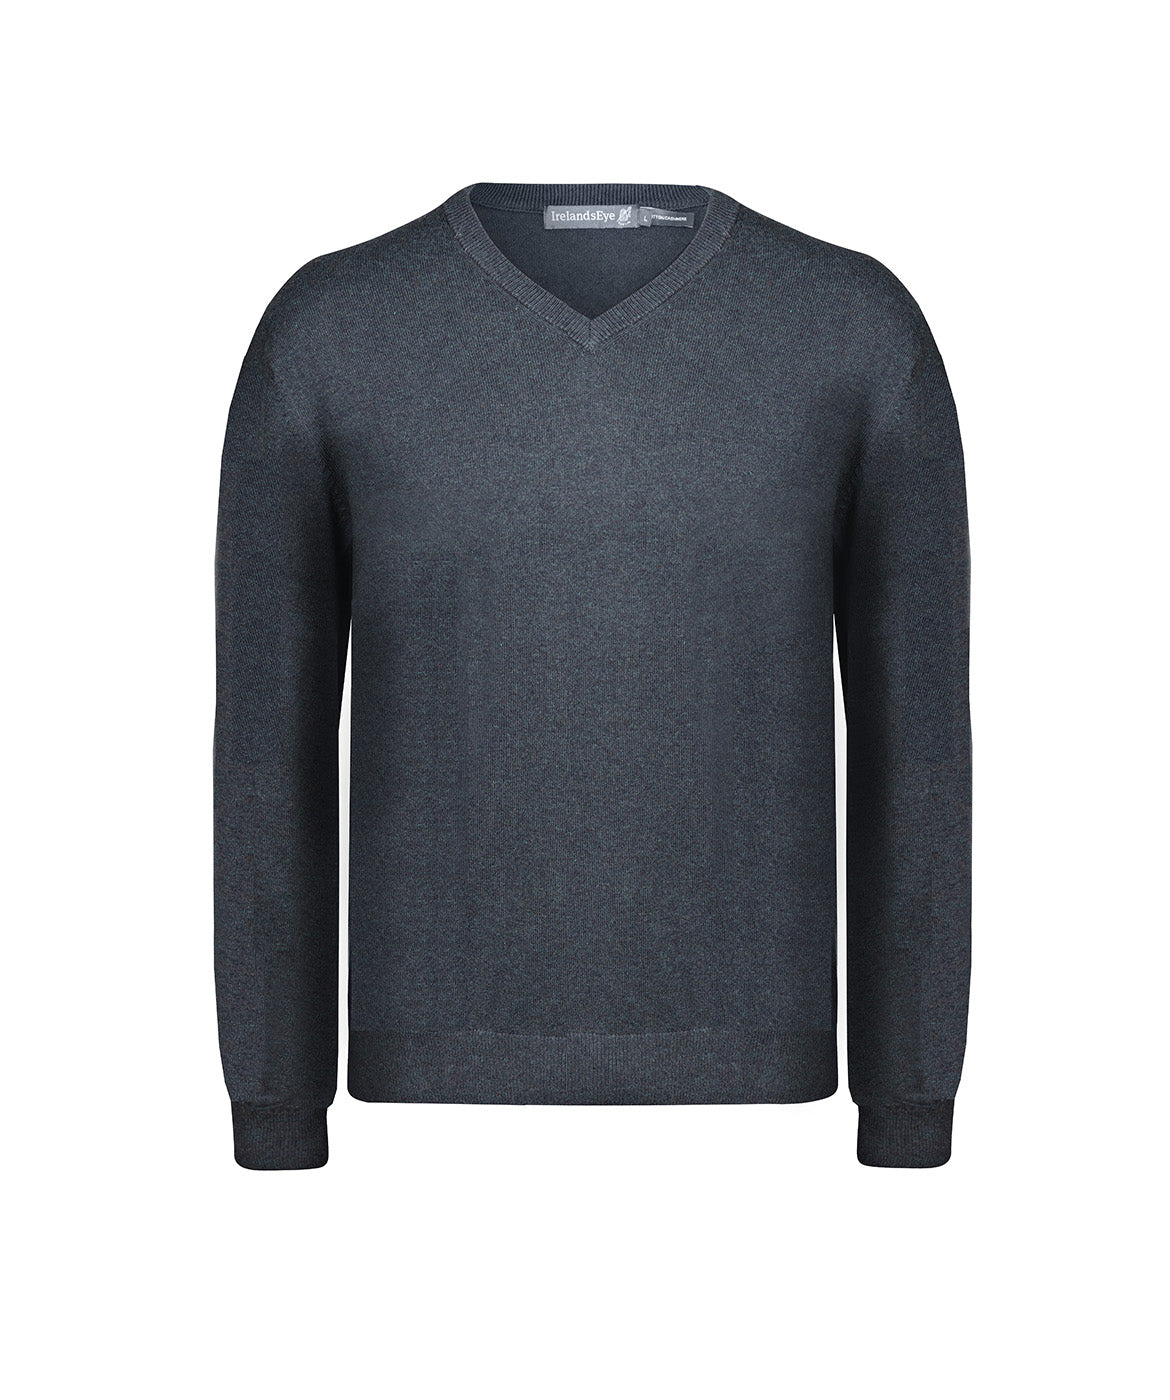 IrelandsEye Knitwear Mens knitted extra fine soft touch v neck sweater Navy